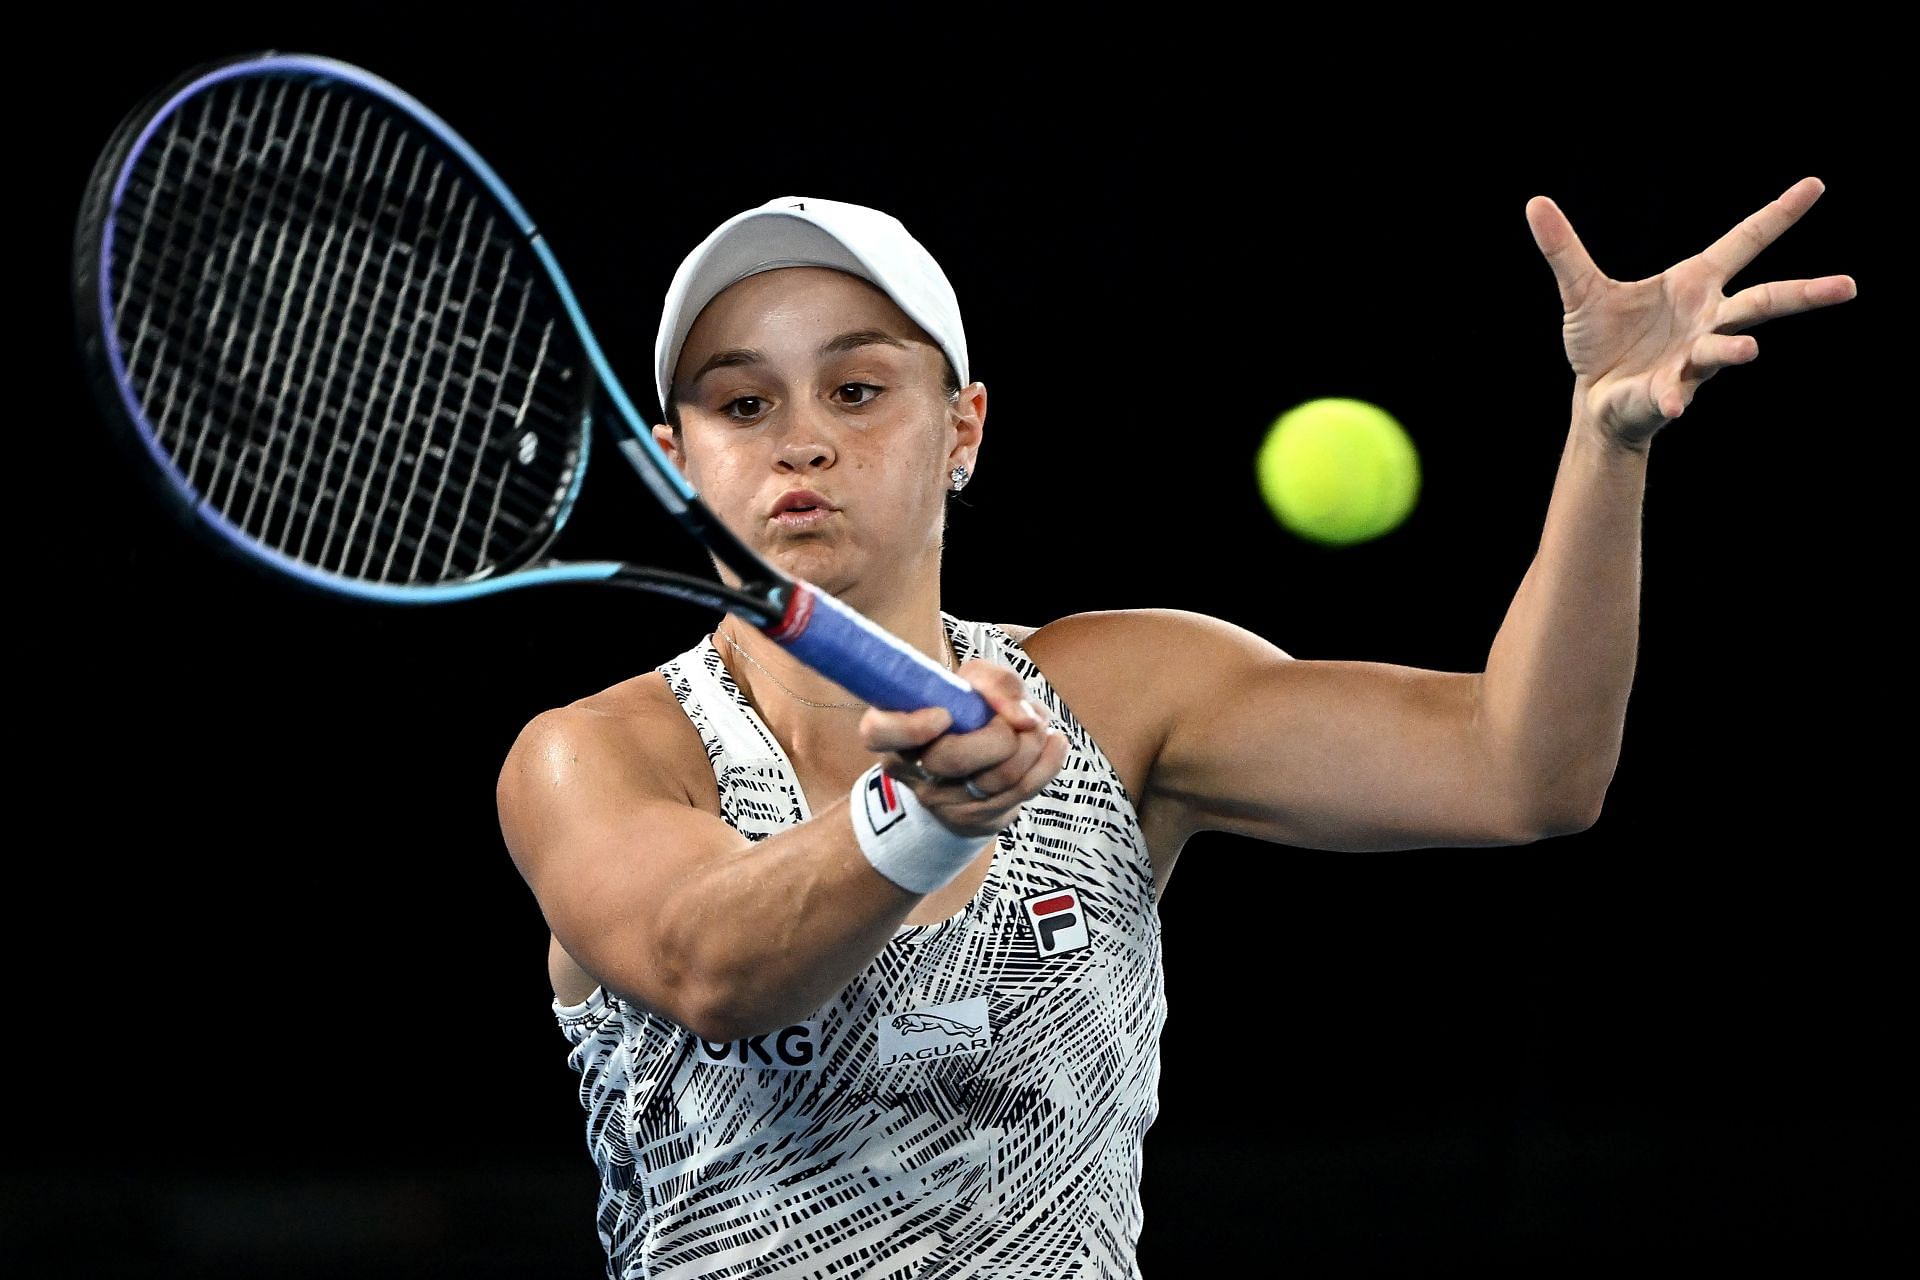 Ashleigh Barty will square off against Danielle Collins in the final of the 2022 Australian Open